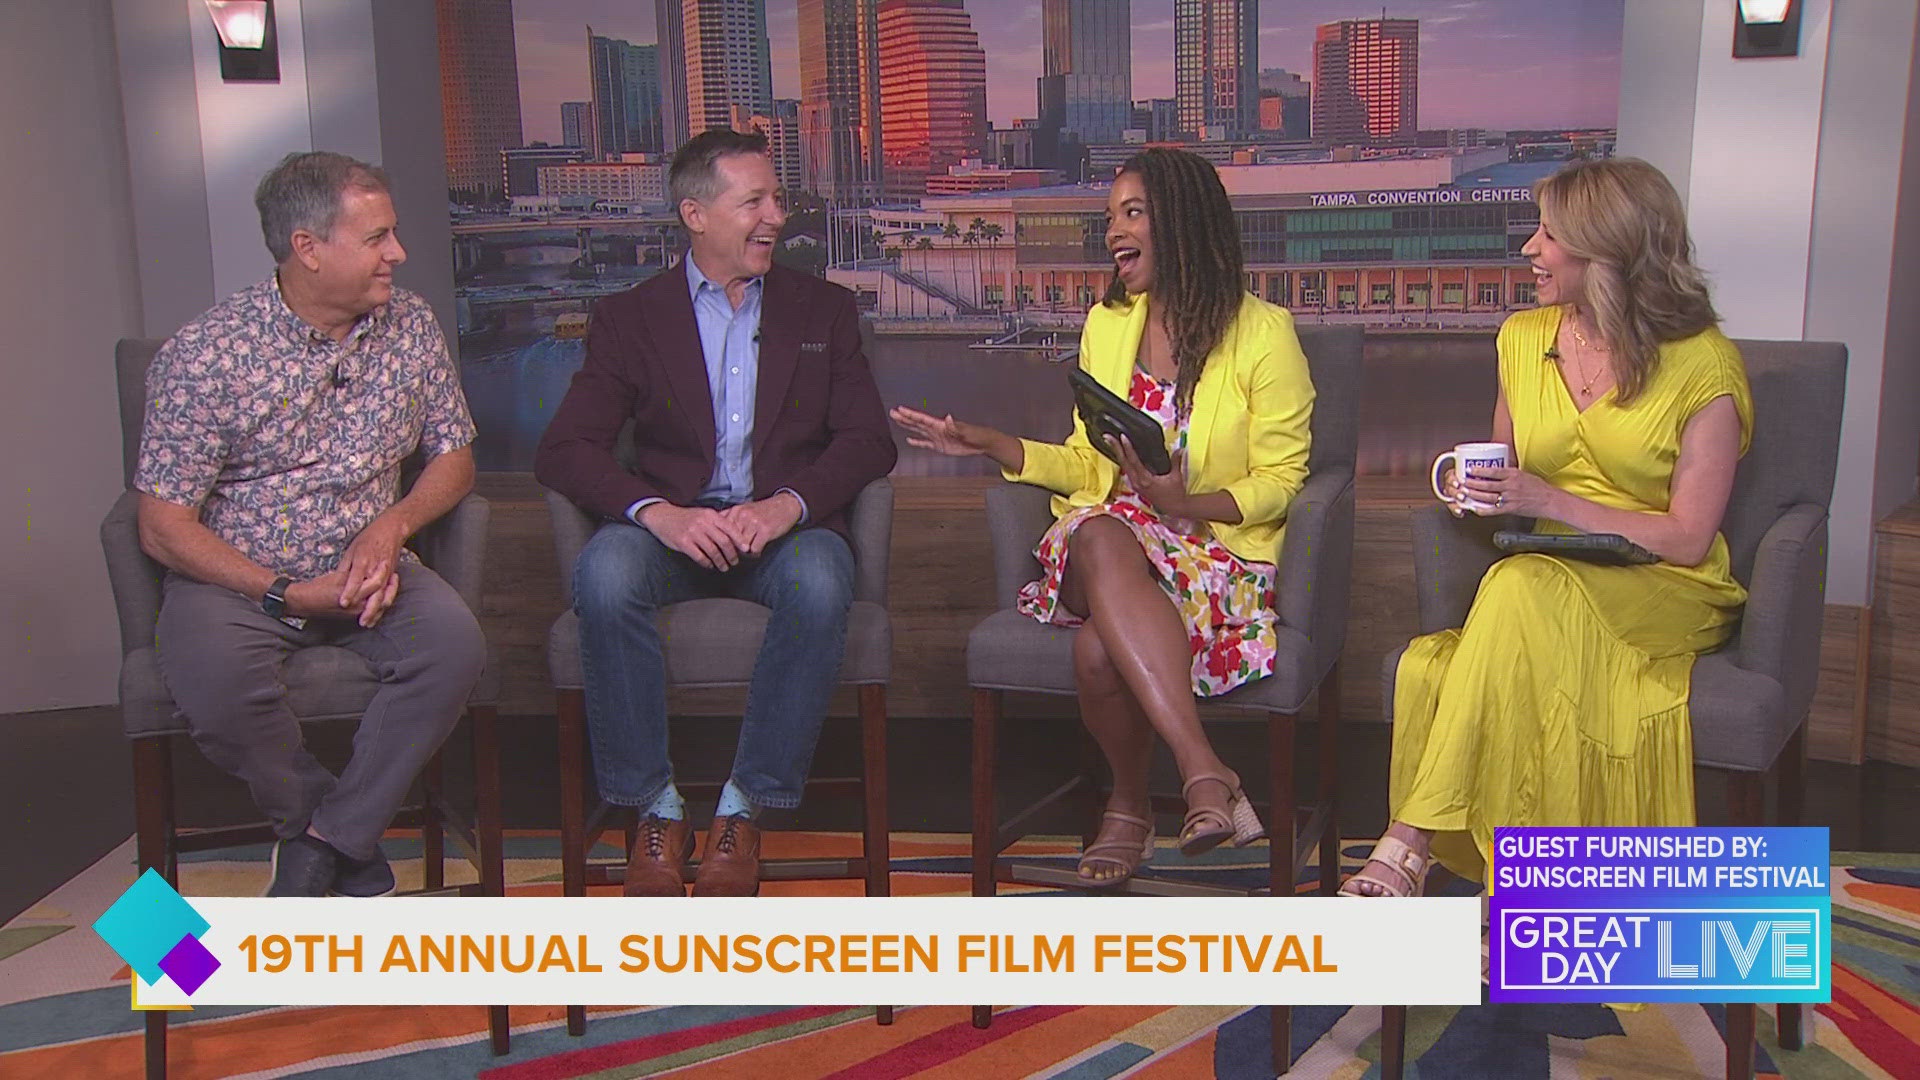 The movie "Bau Artist a War" is the opening night film at the Sunscreen Film Festival. The film’s producer joined GDL to talk about the inspirational story.